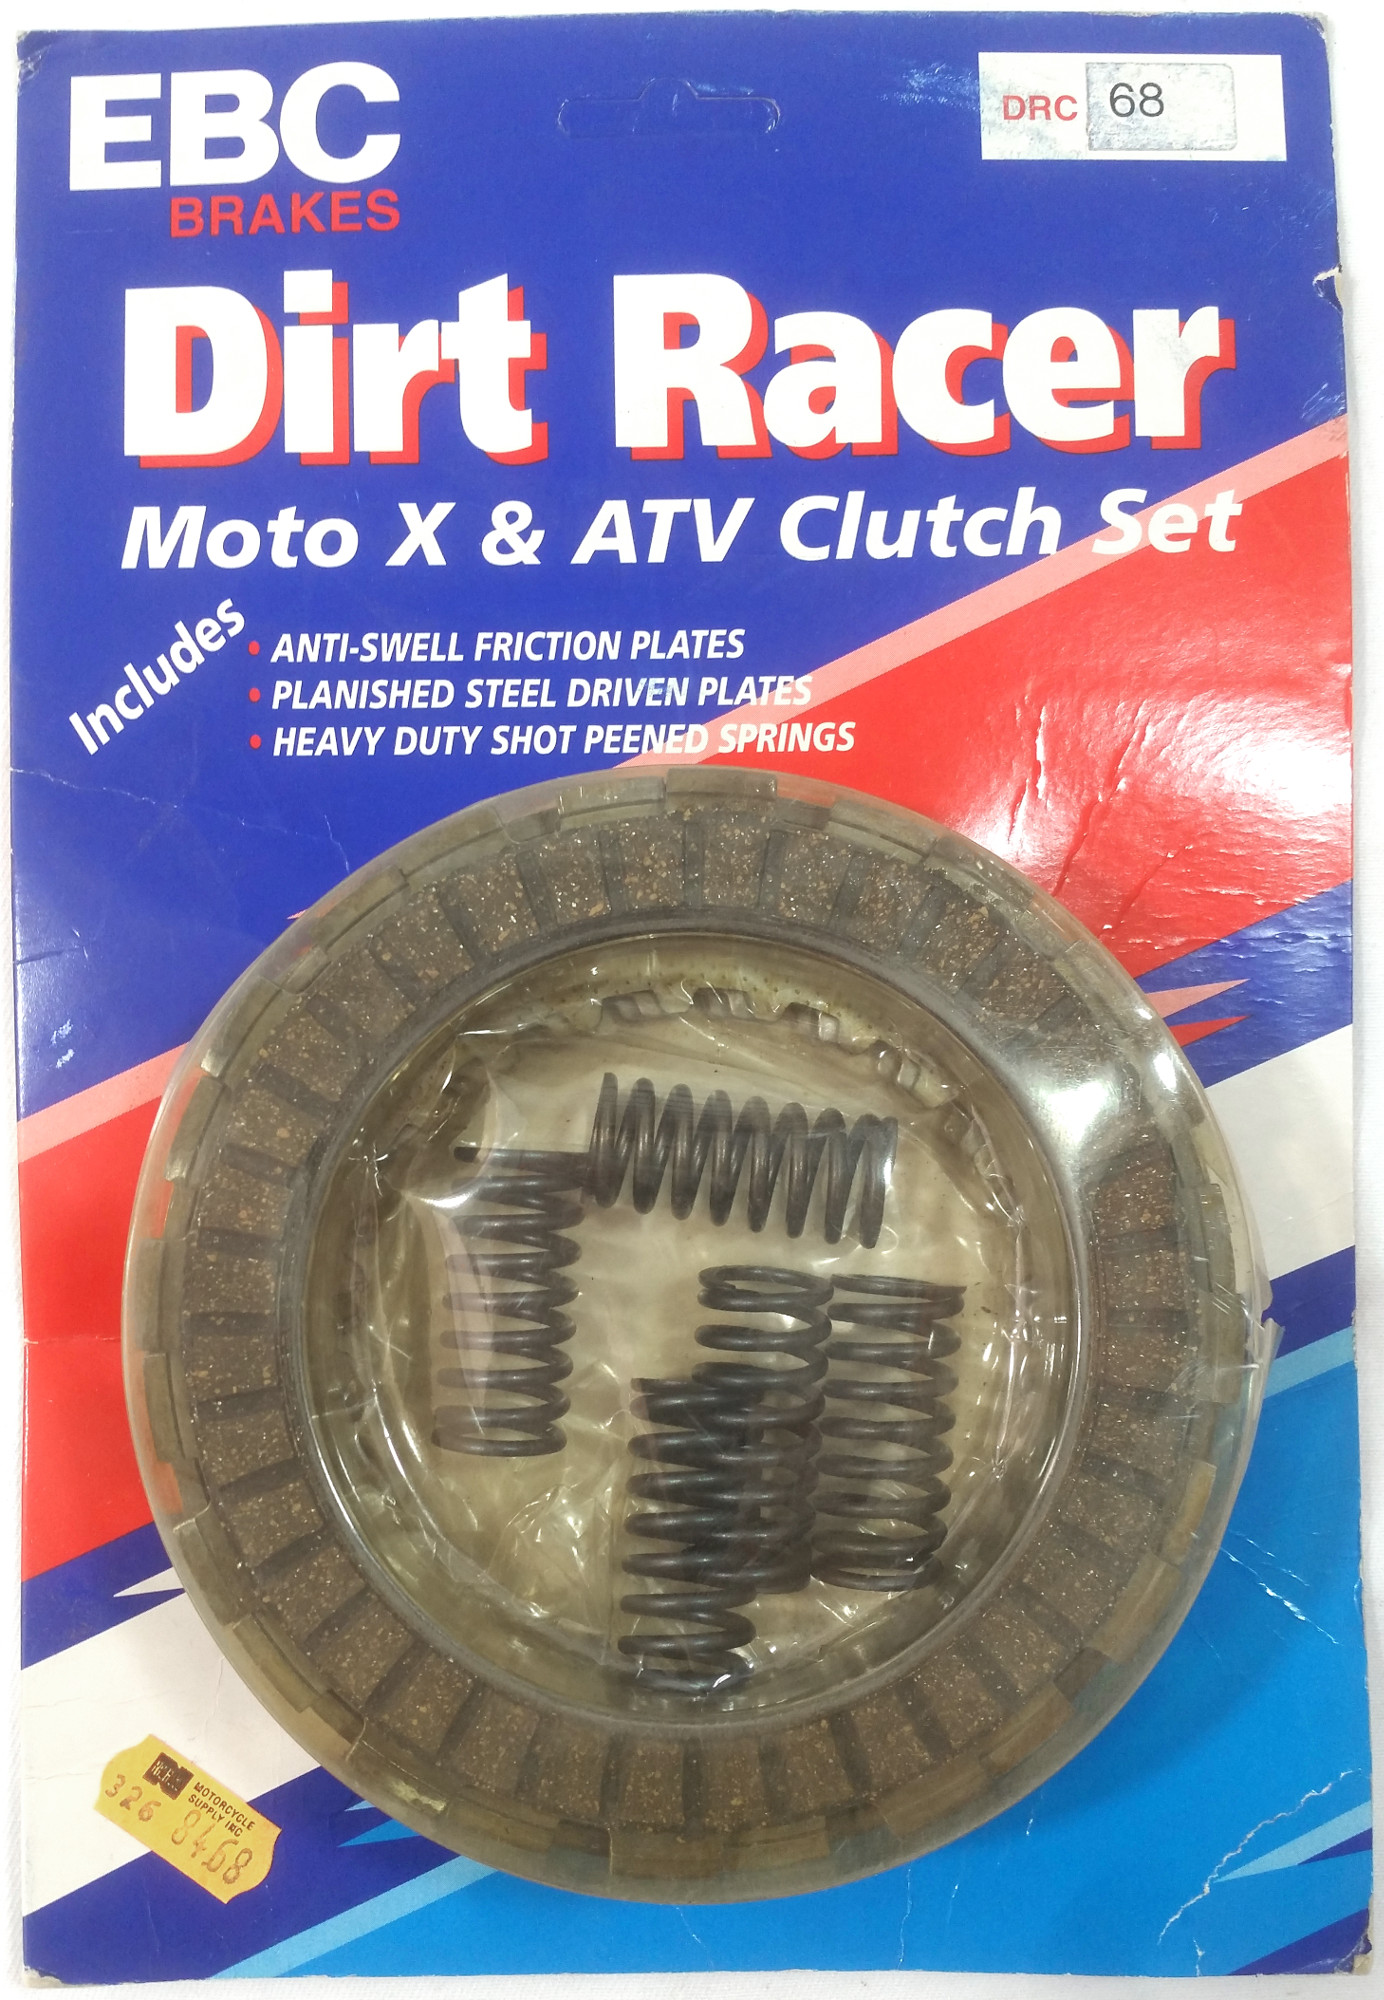 DRC Complete Clutch Kit - 1985 Honda CR125R - Click Image to Close